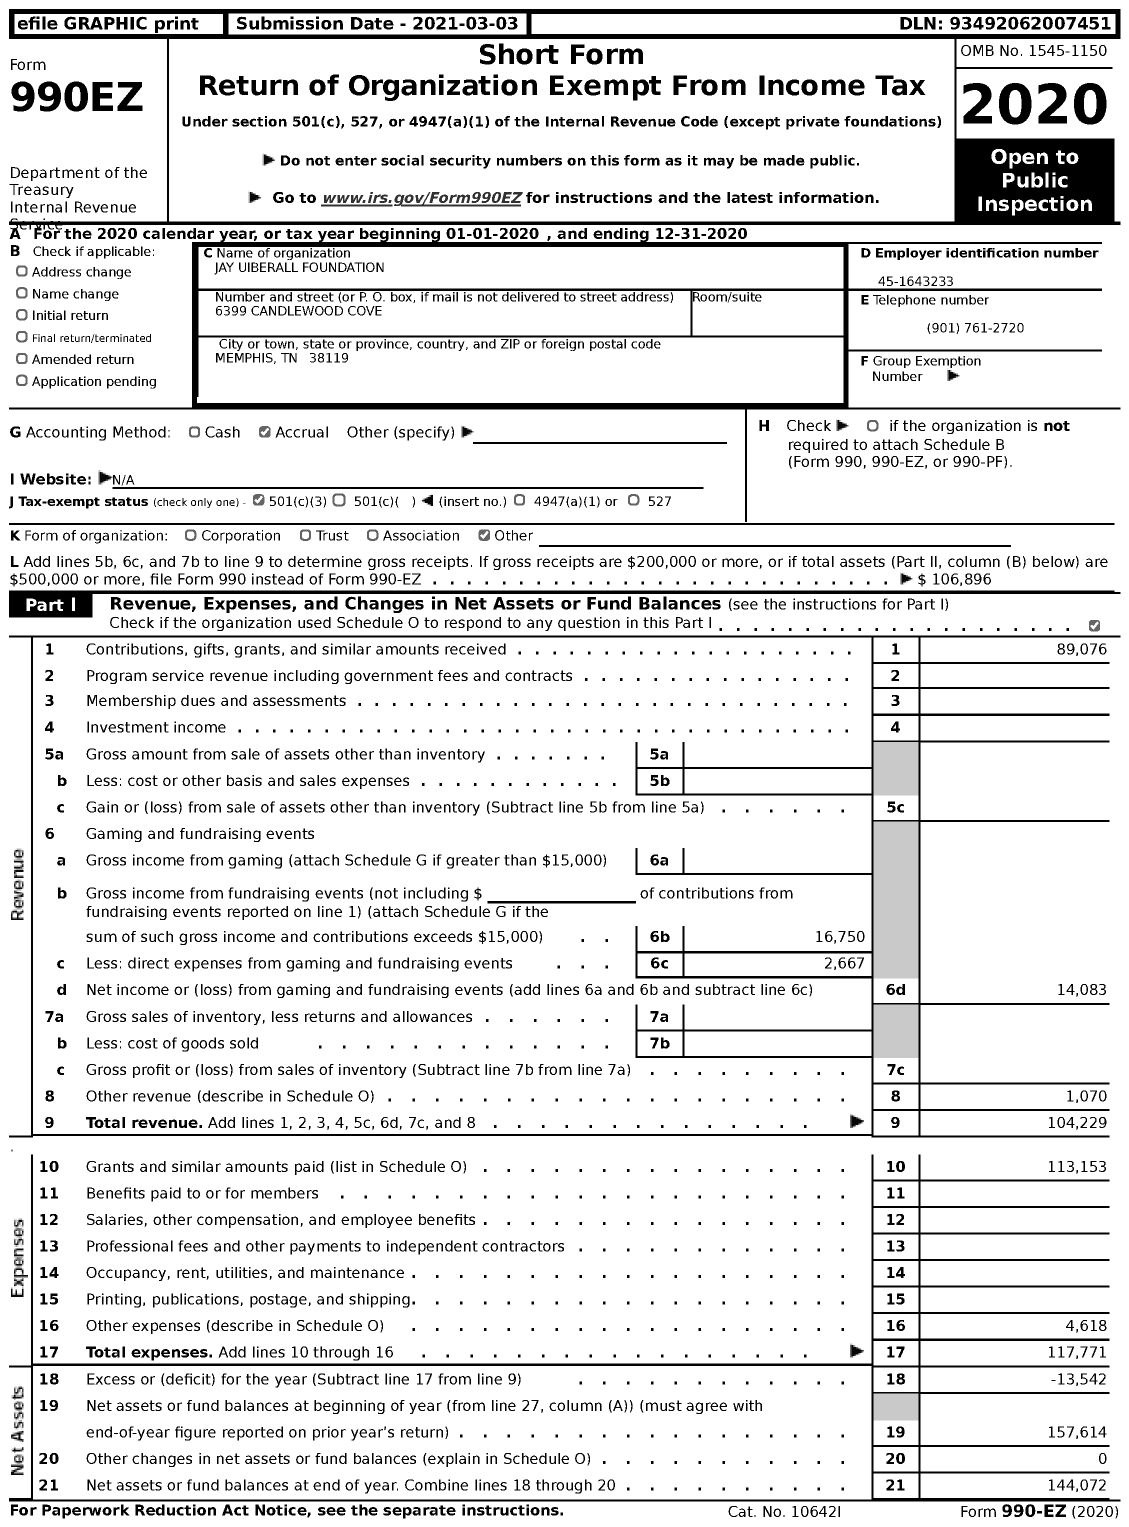 Image of first page of 2020 Form 990EZ for Jay Uiberall Foundation